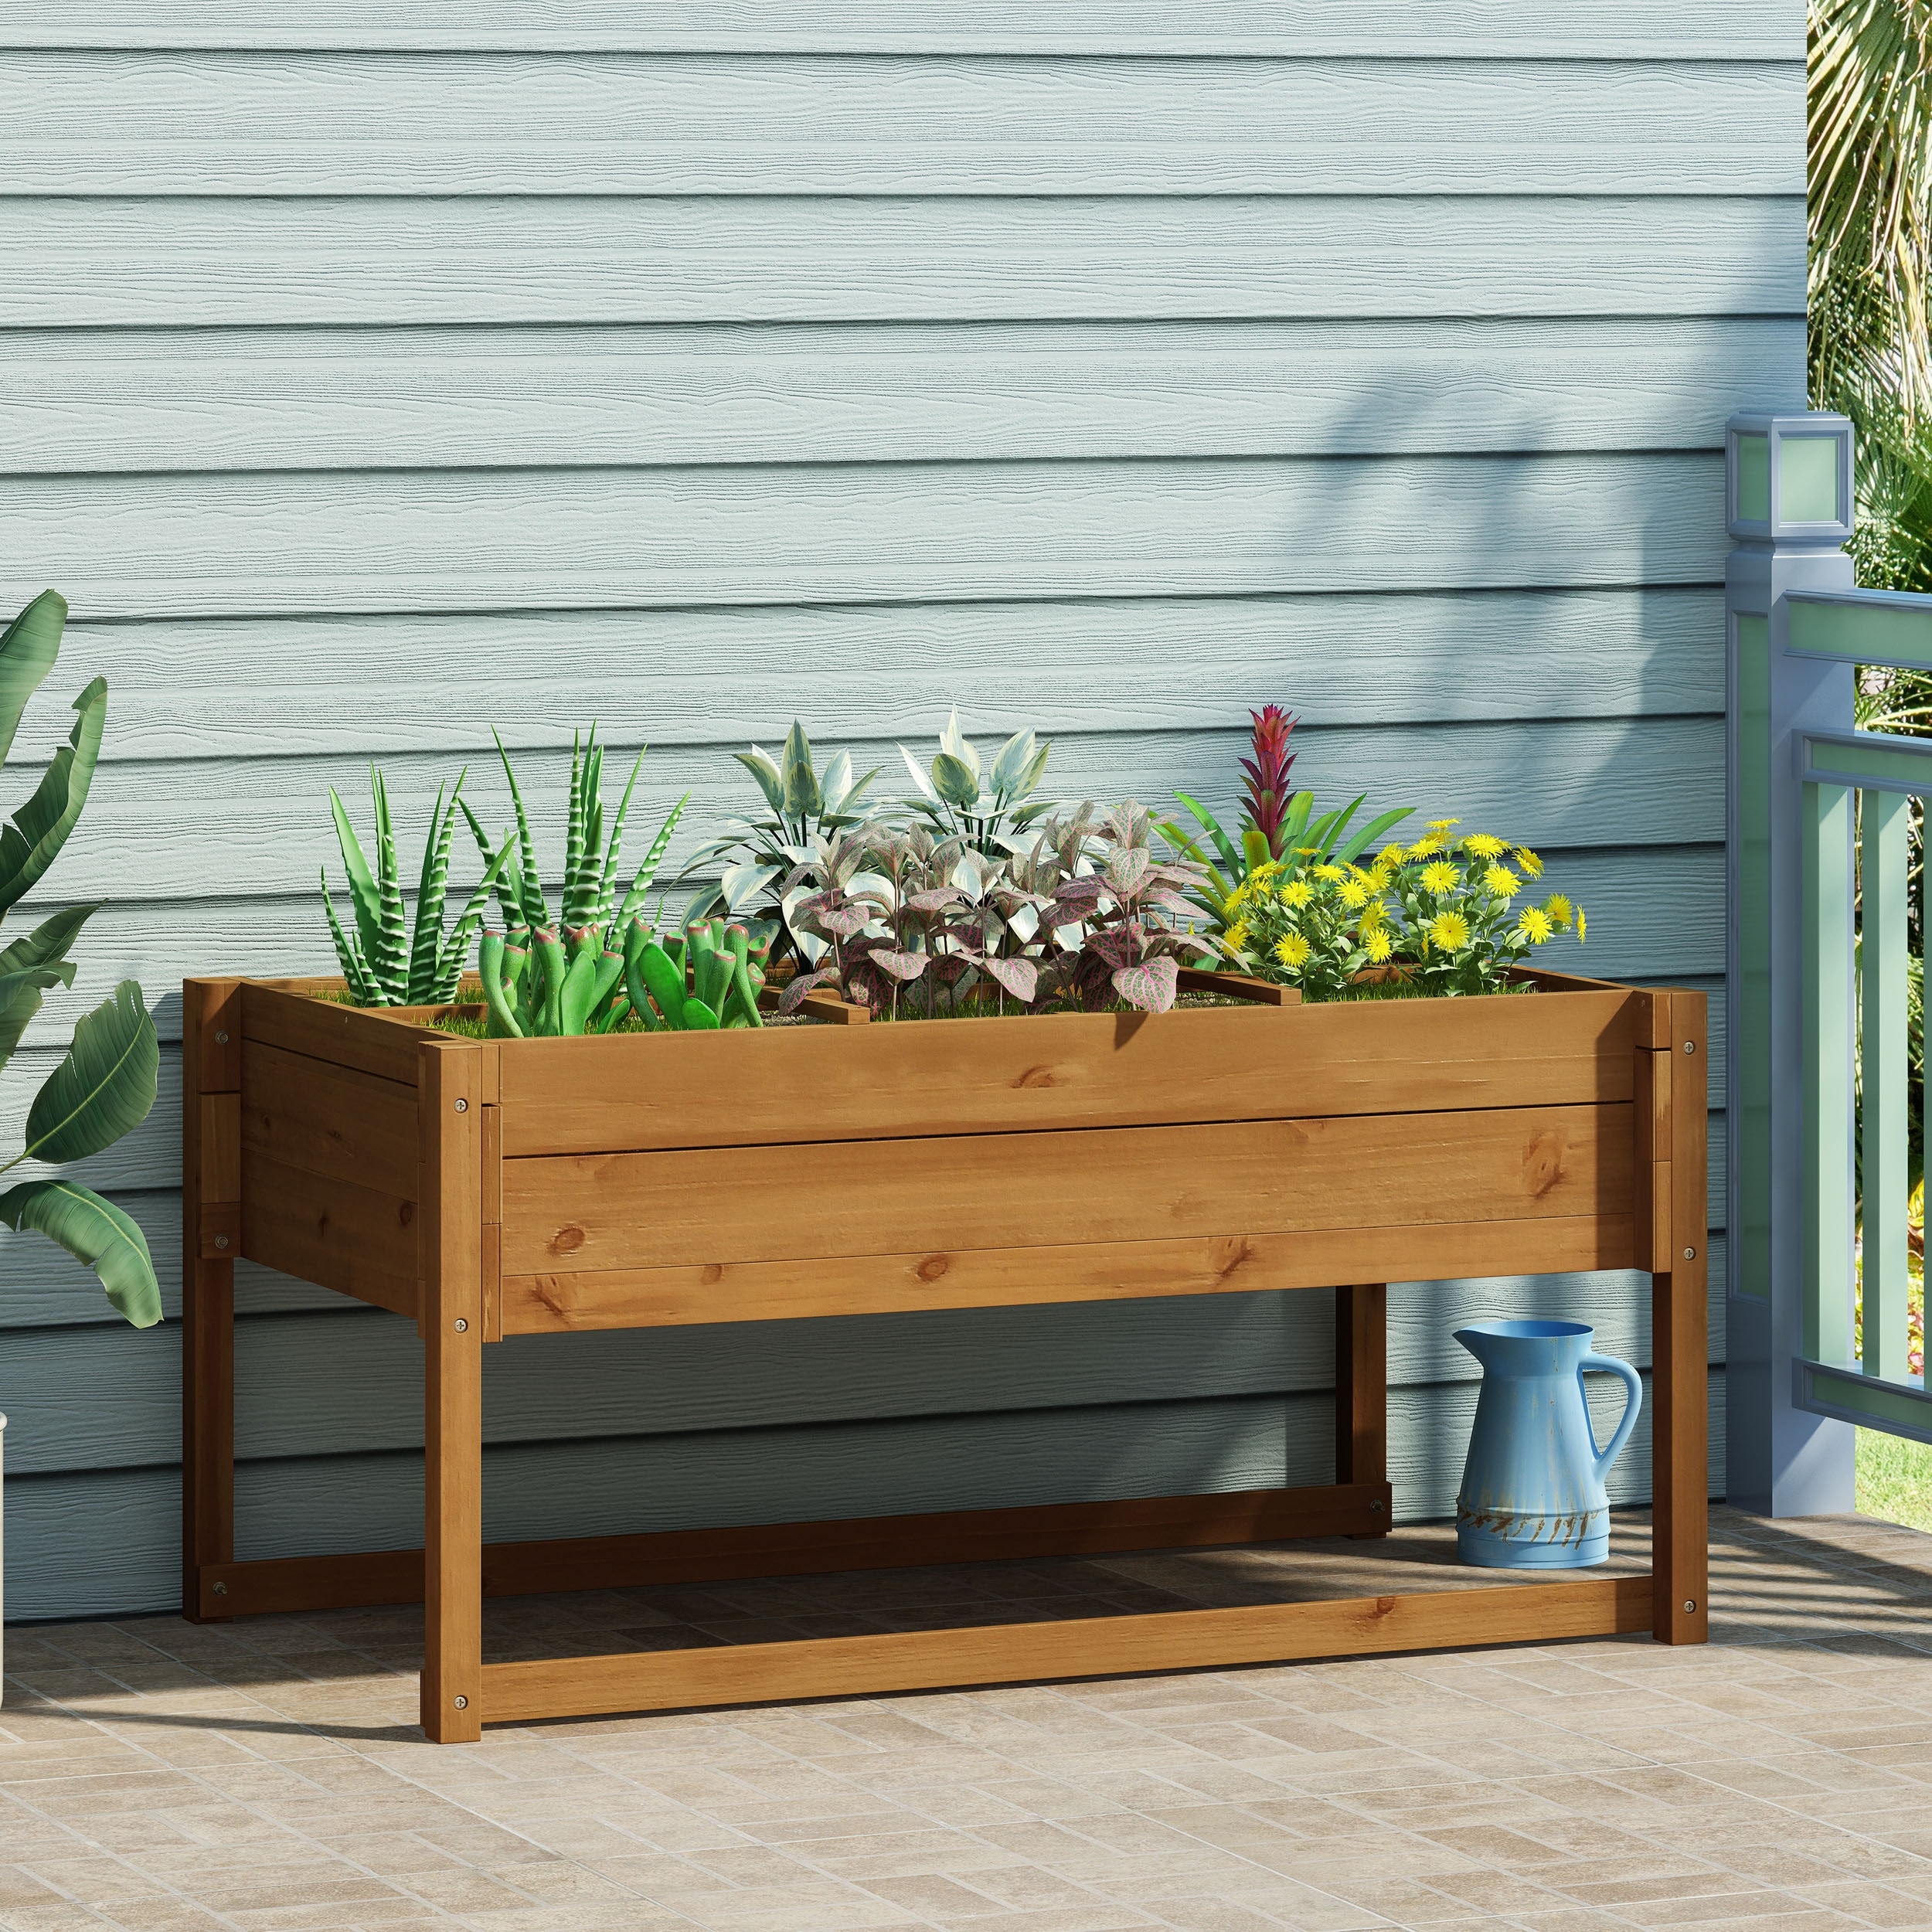 Robin Outdoor Firwood Outdoor Planter by Christopher Knight Home - Sale -